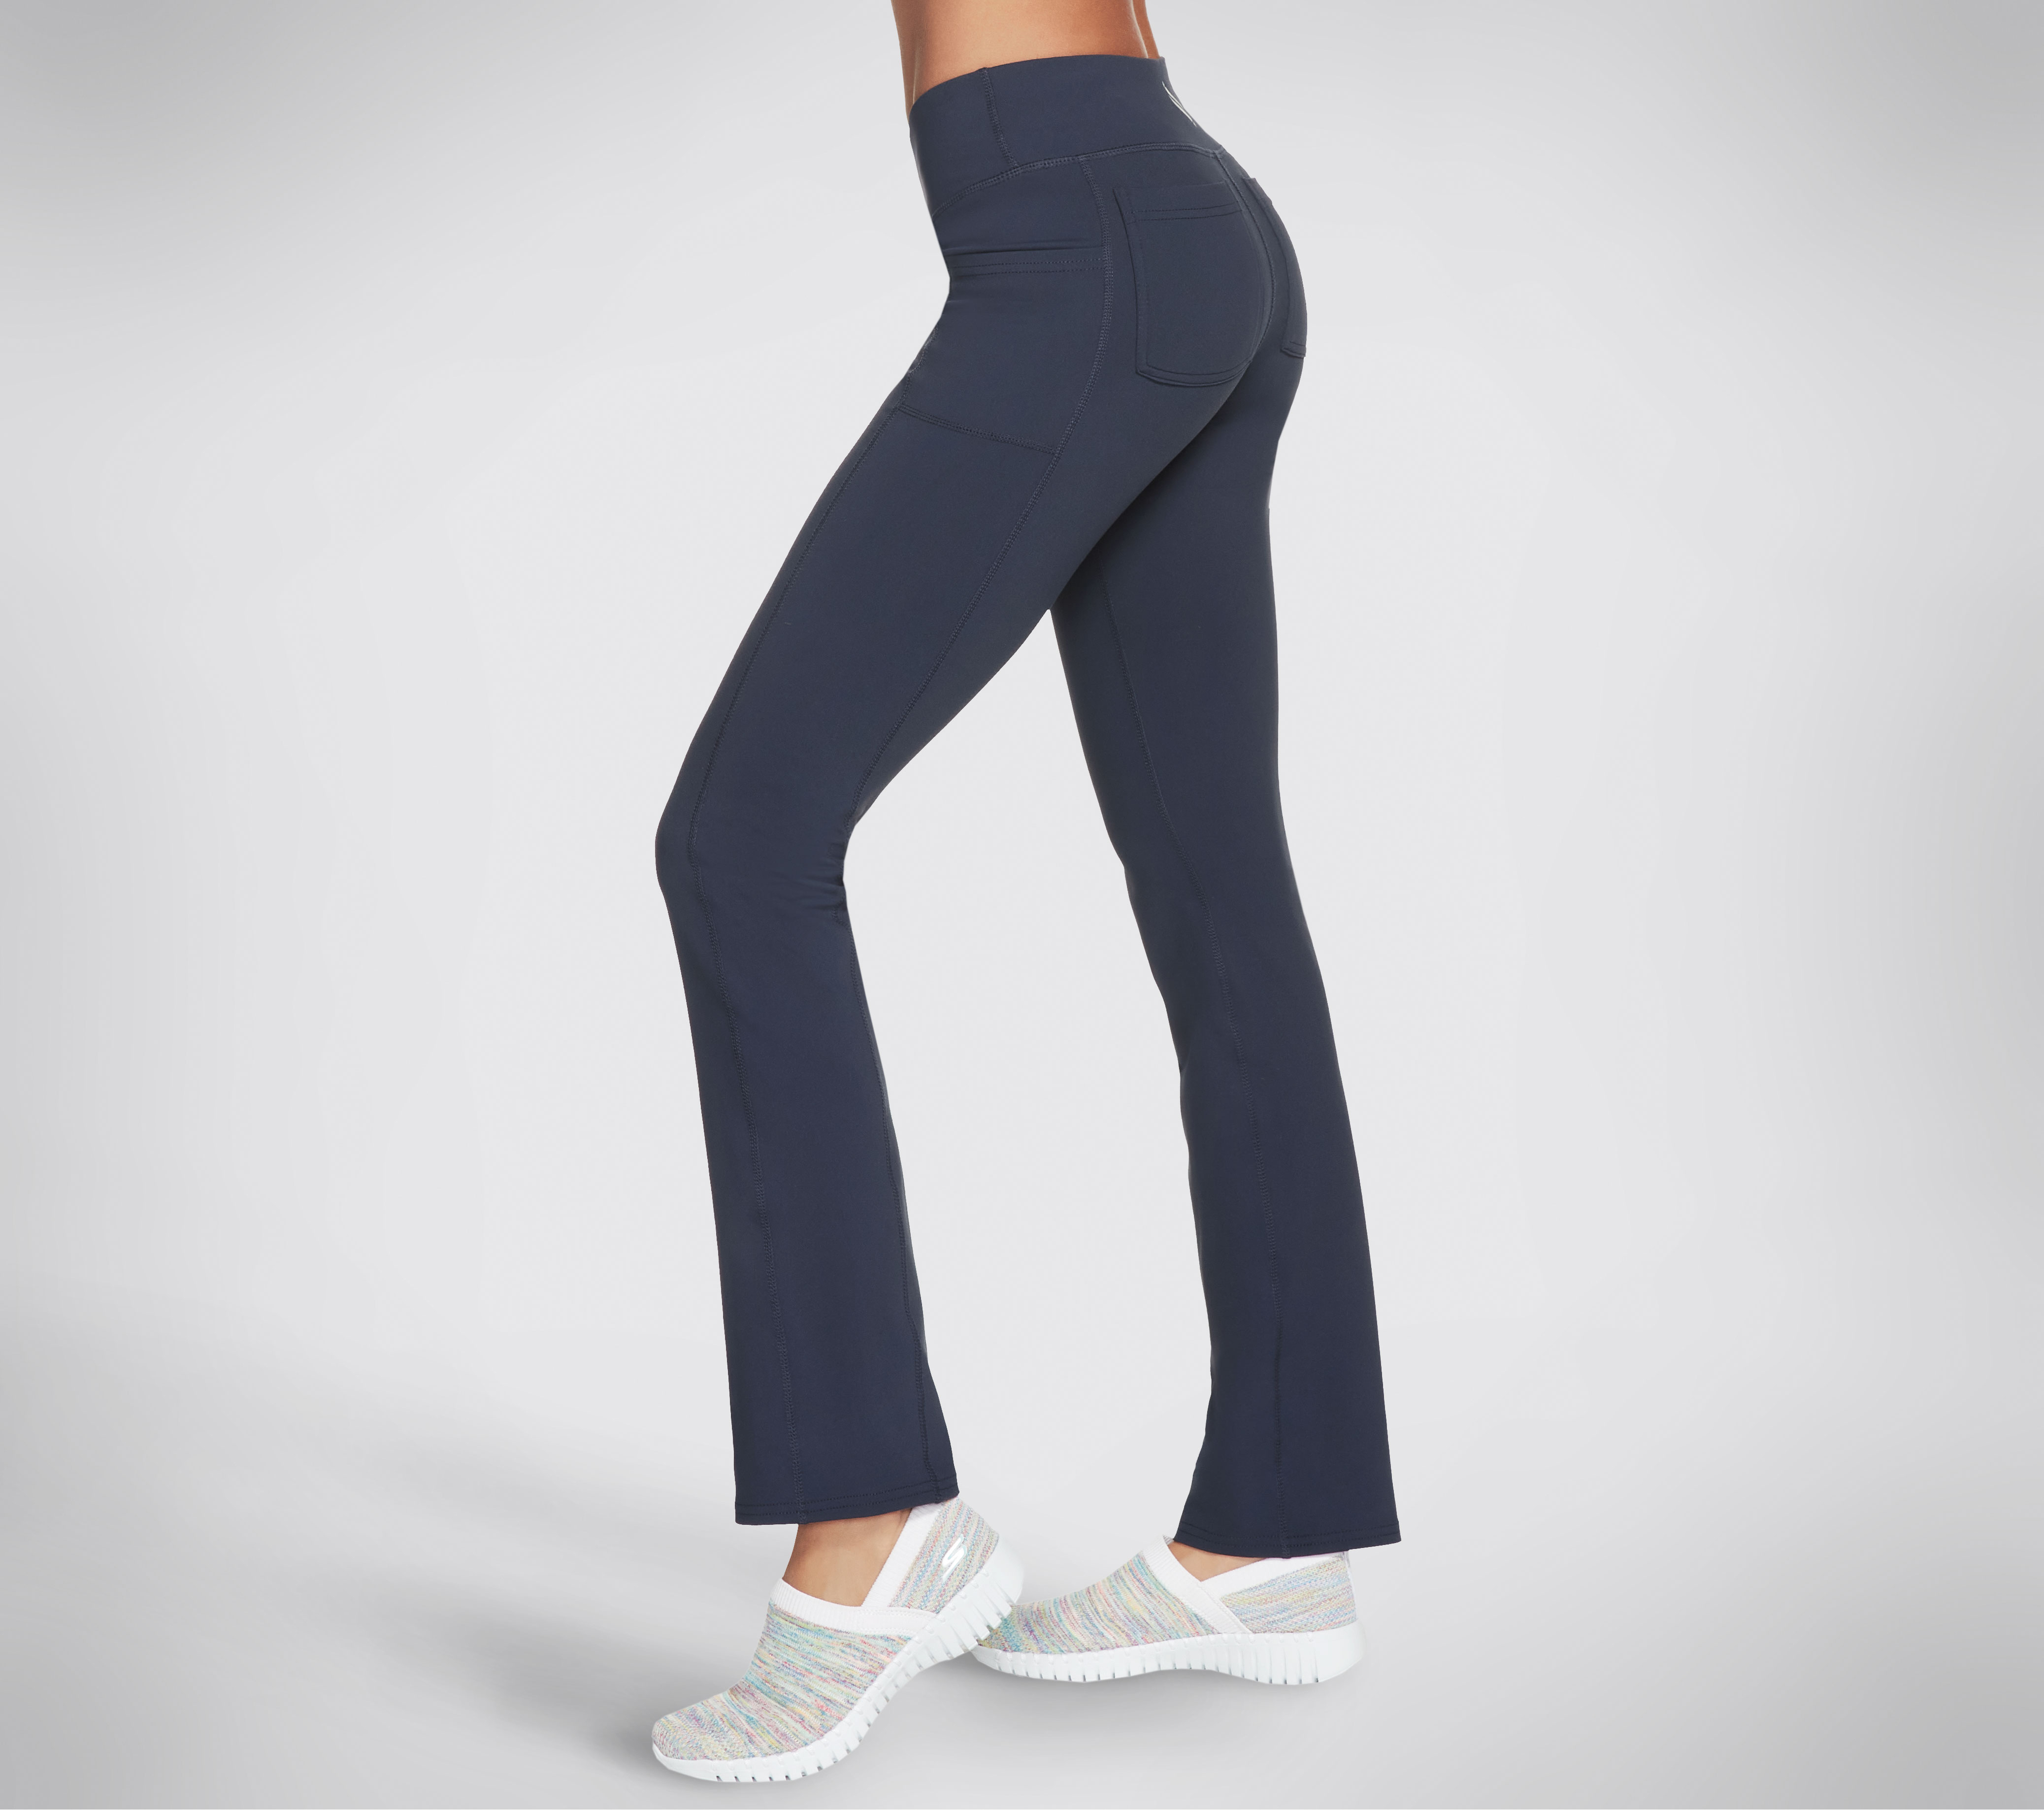 Clothing & Shoes - Bottoms - Pants - Skechers Go Walk Joy Pant - Online  Shopping for Canadians